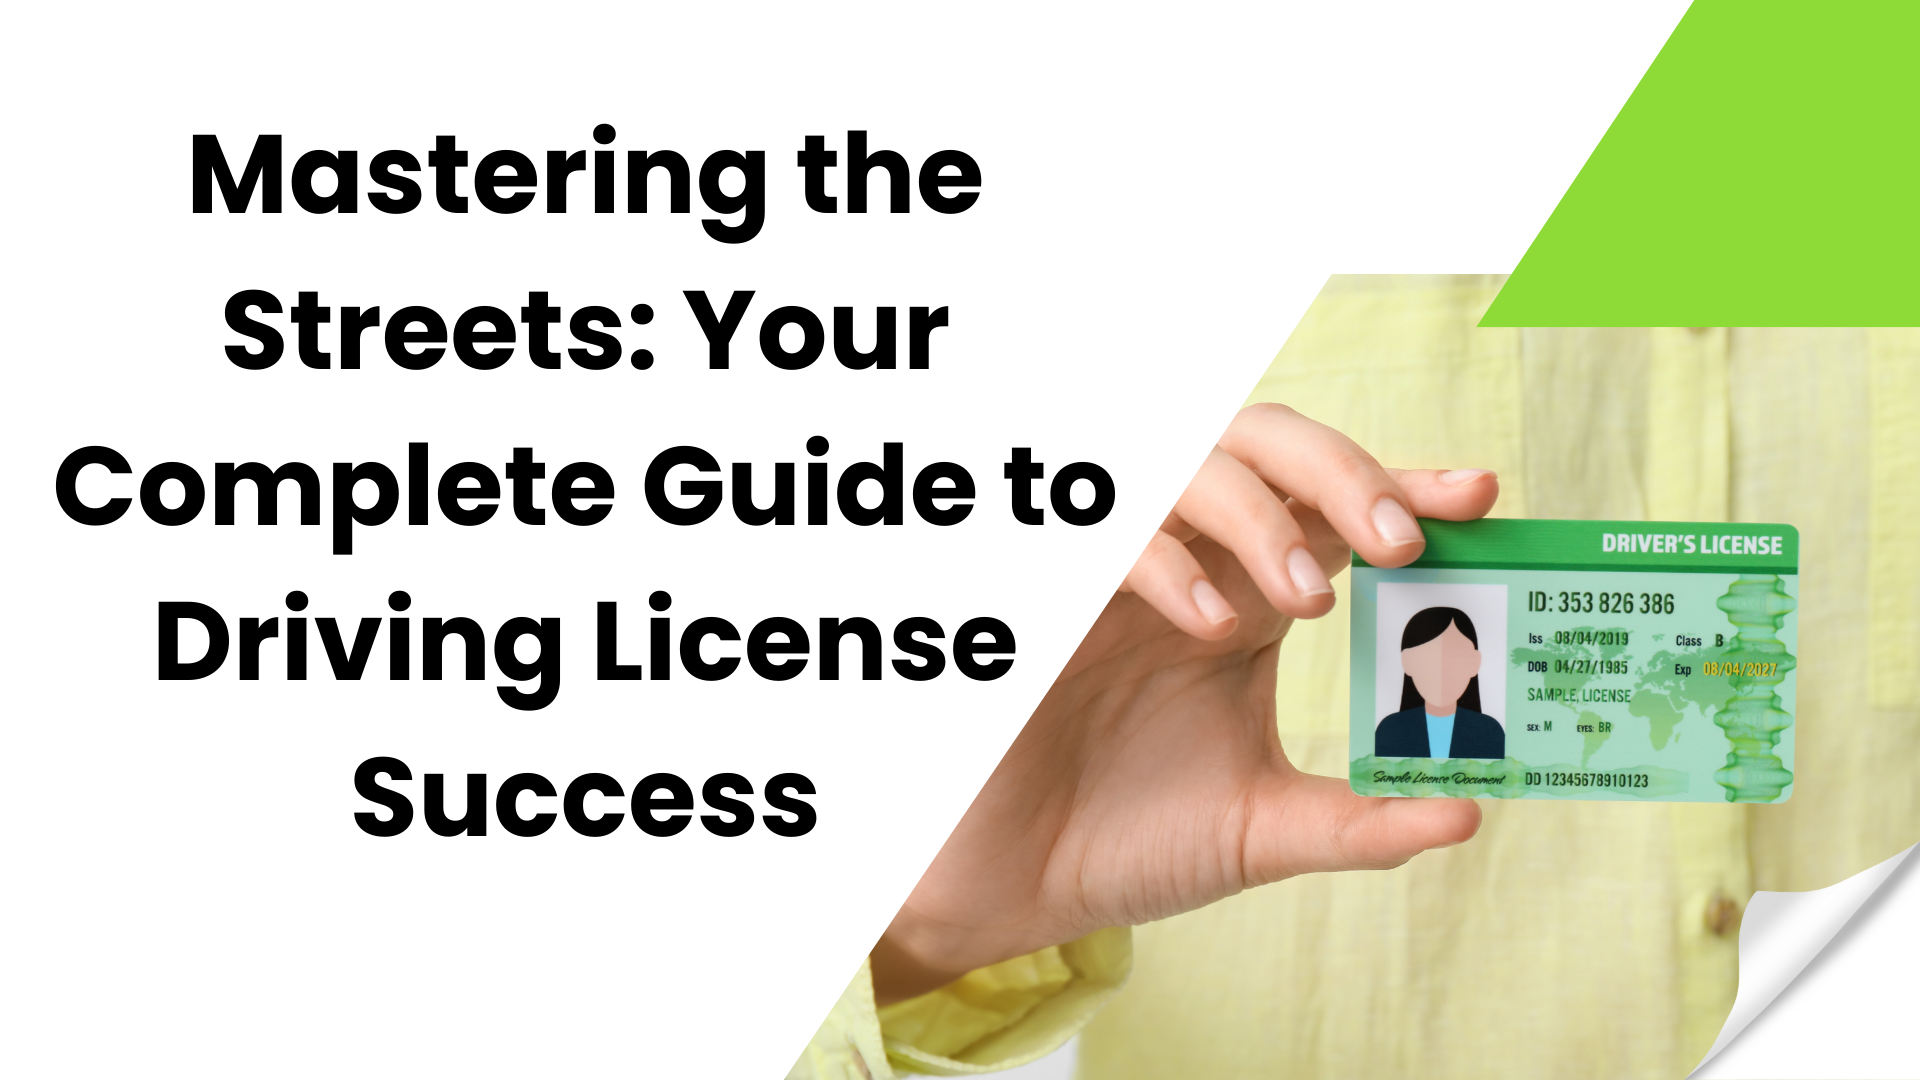 Your Complete Guide to Driving License Success